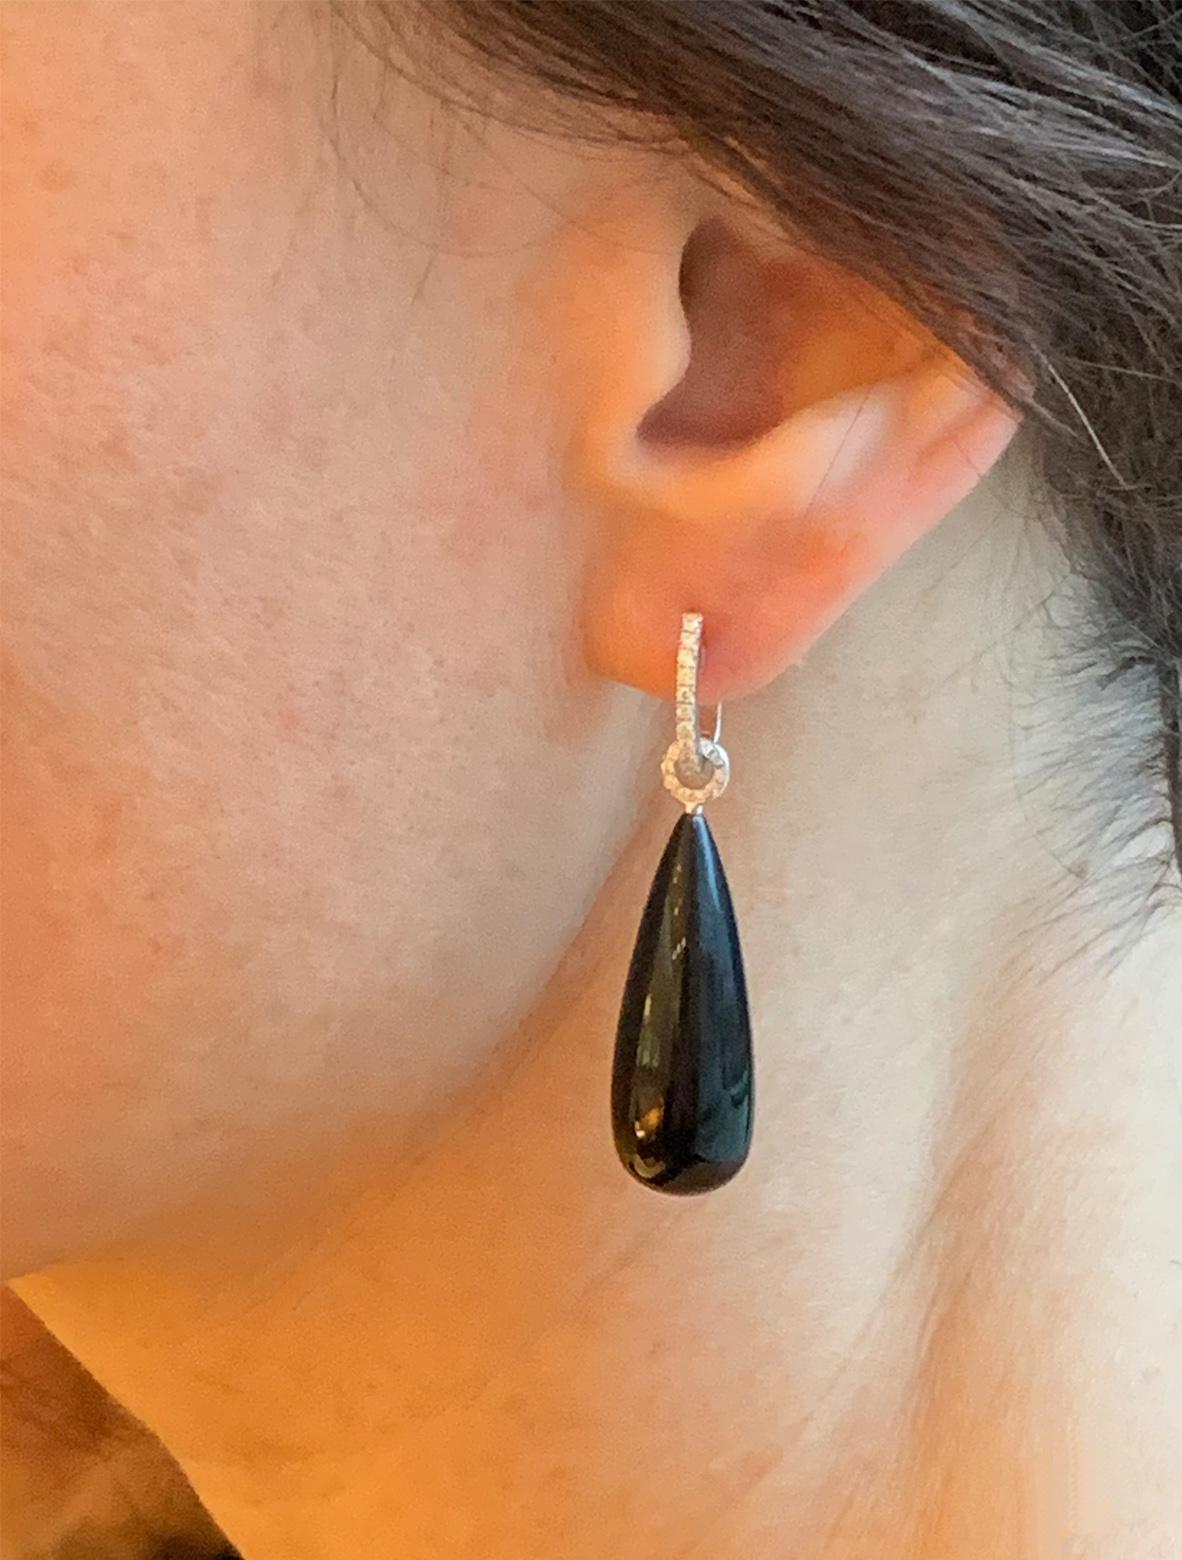 Precious basics earrings in 18 carat white gold with onyx 47.11 ct and diamonds 0.26 ct made by Colleen B. Rosenblat.